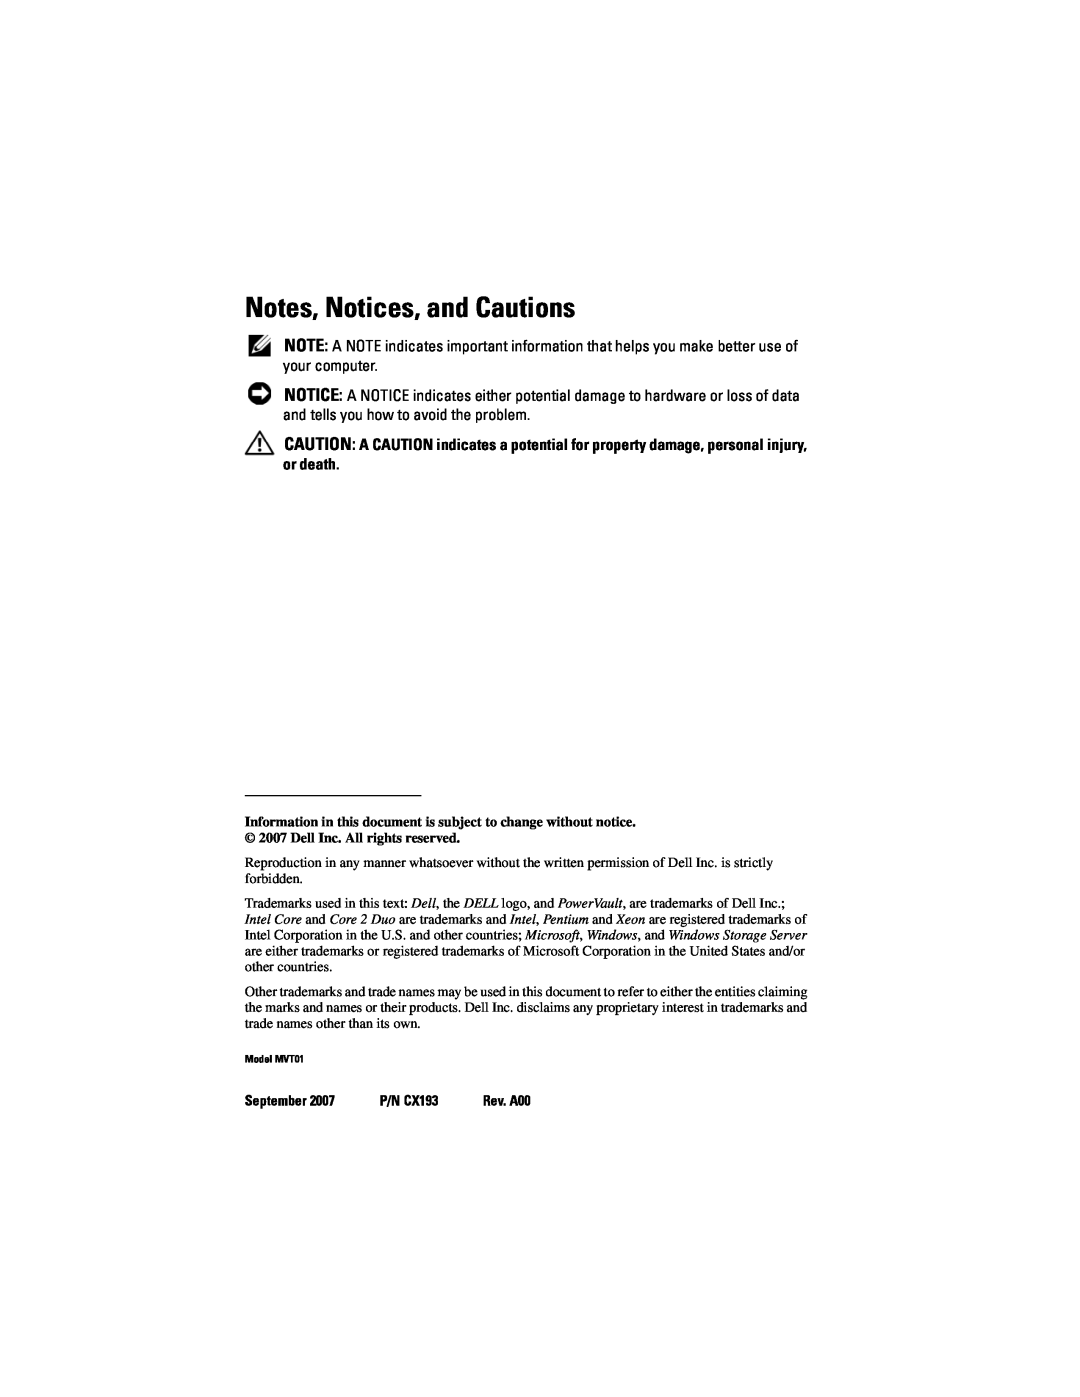 Dell manual Notes, Notices, and Cautions, September, P/N CX193 